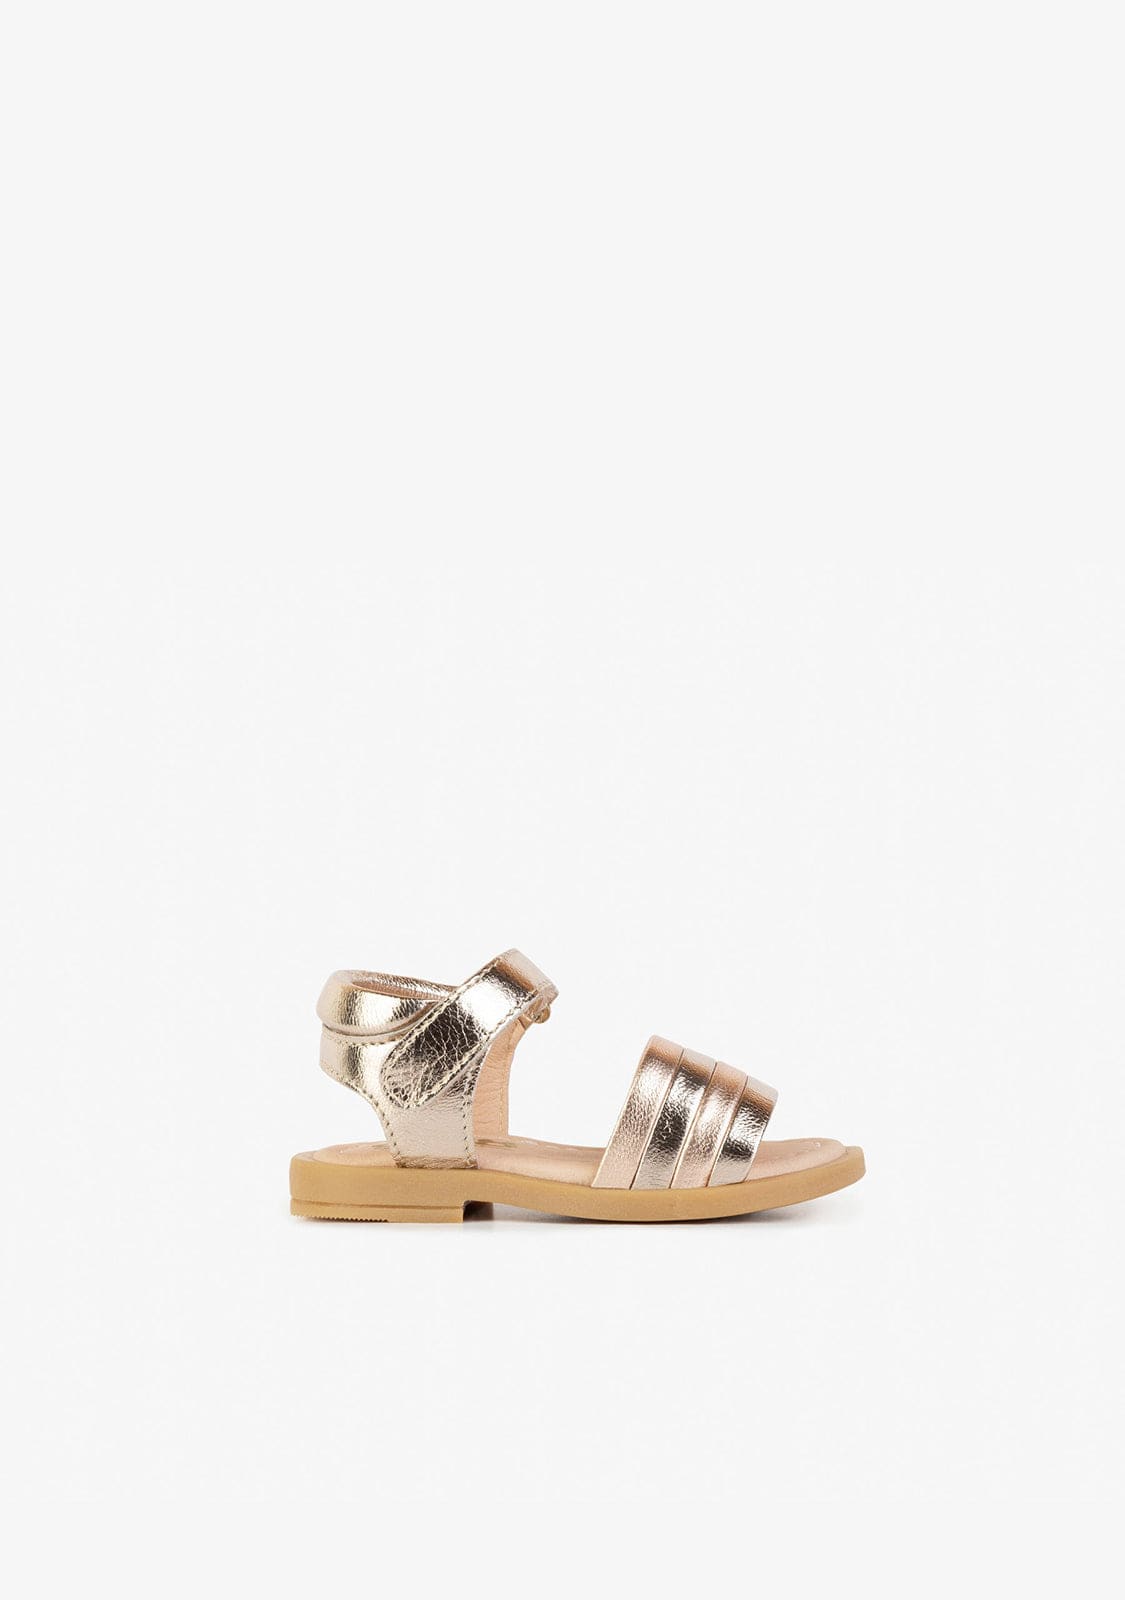 OSITO Shoes Baby's Stripes Platinum Leather Sandals